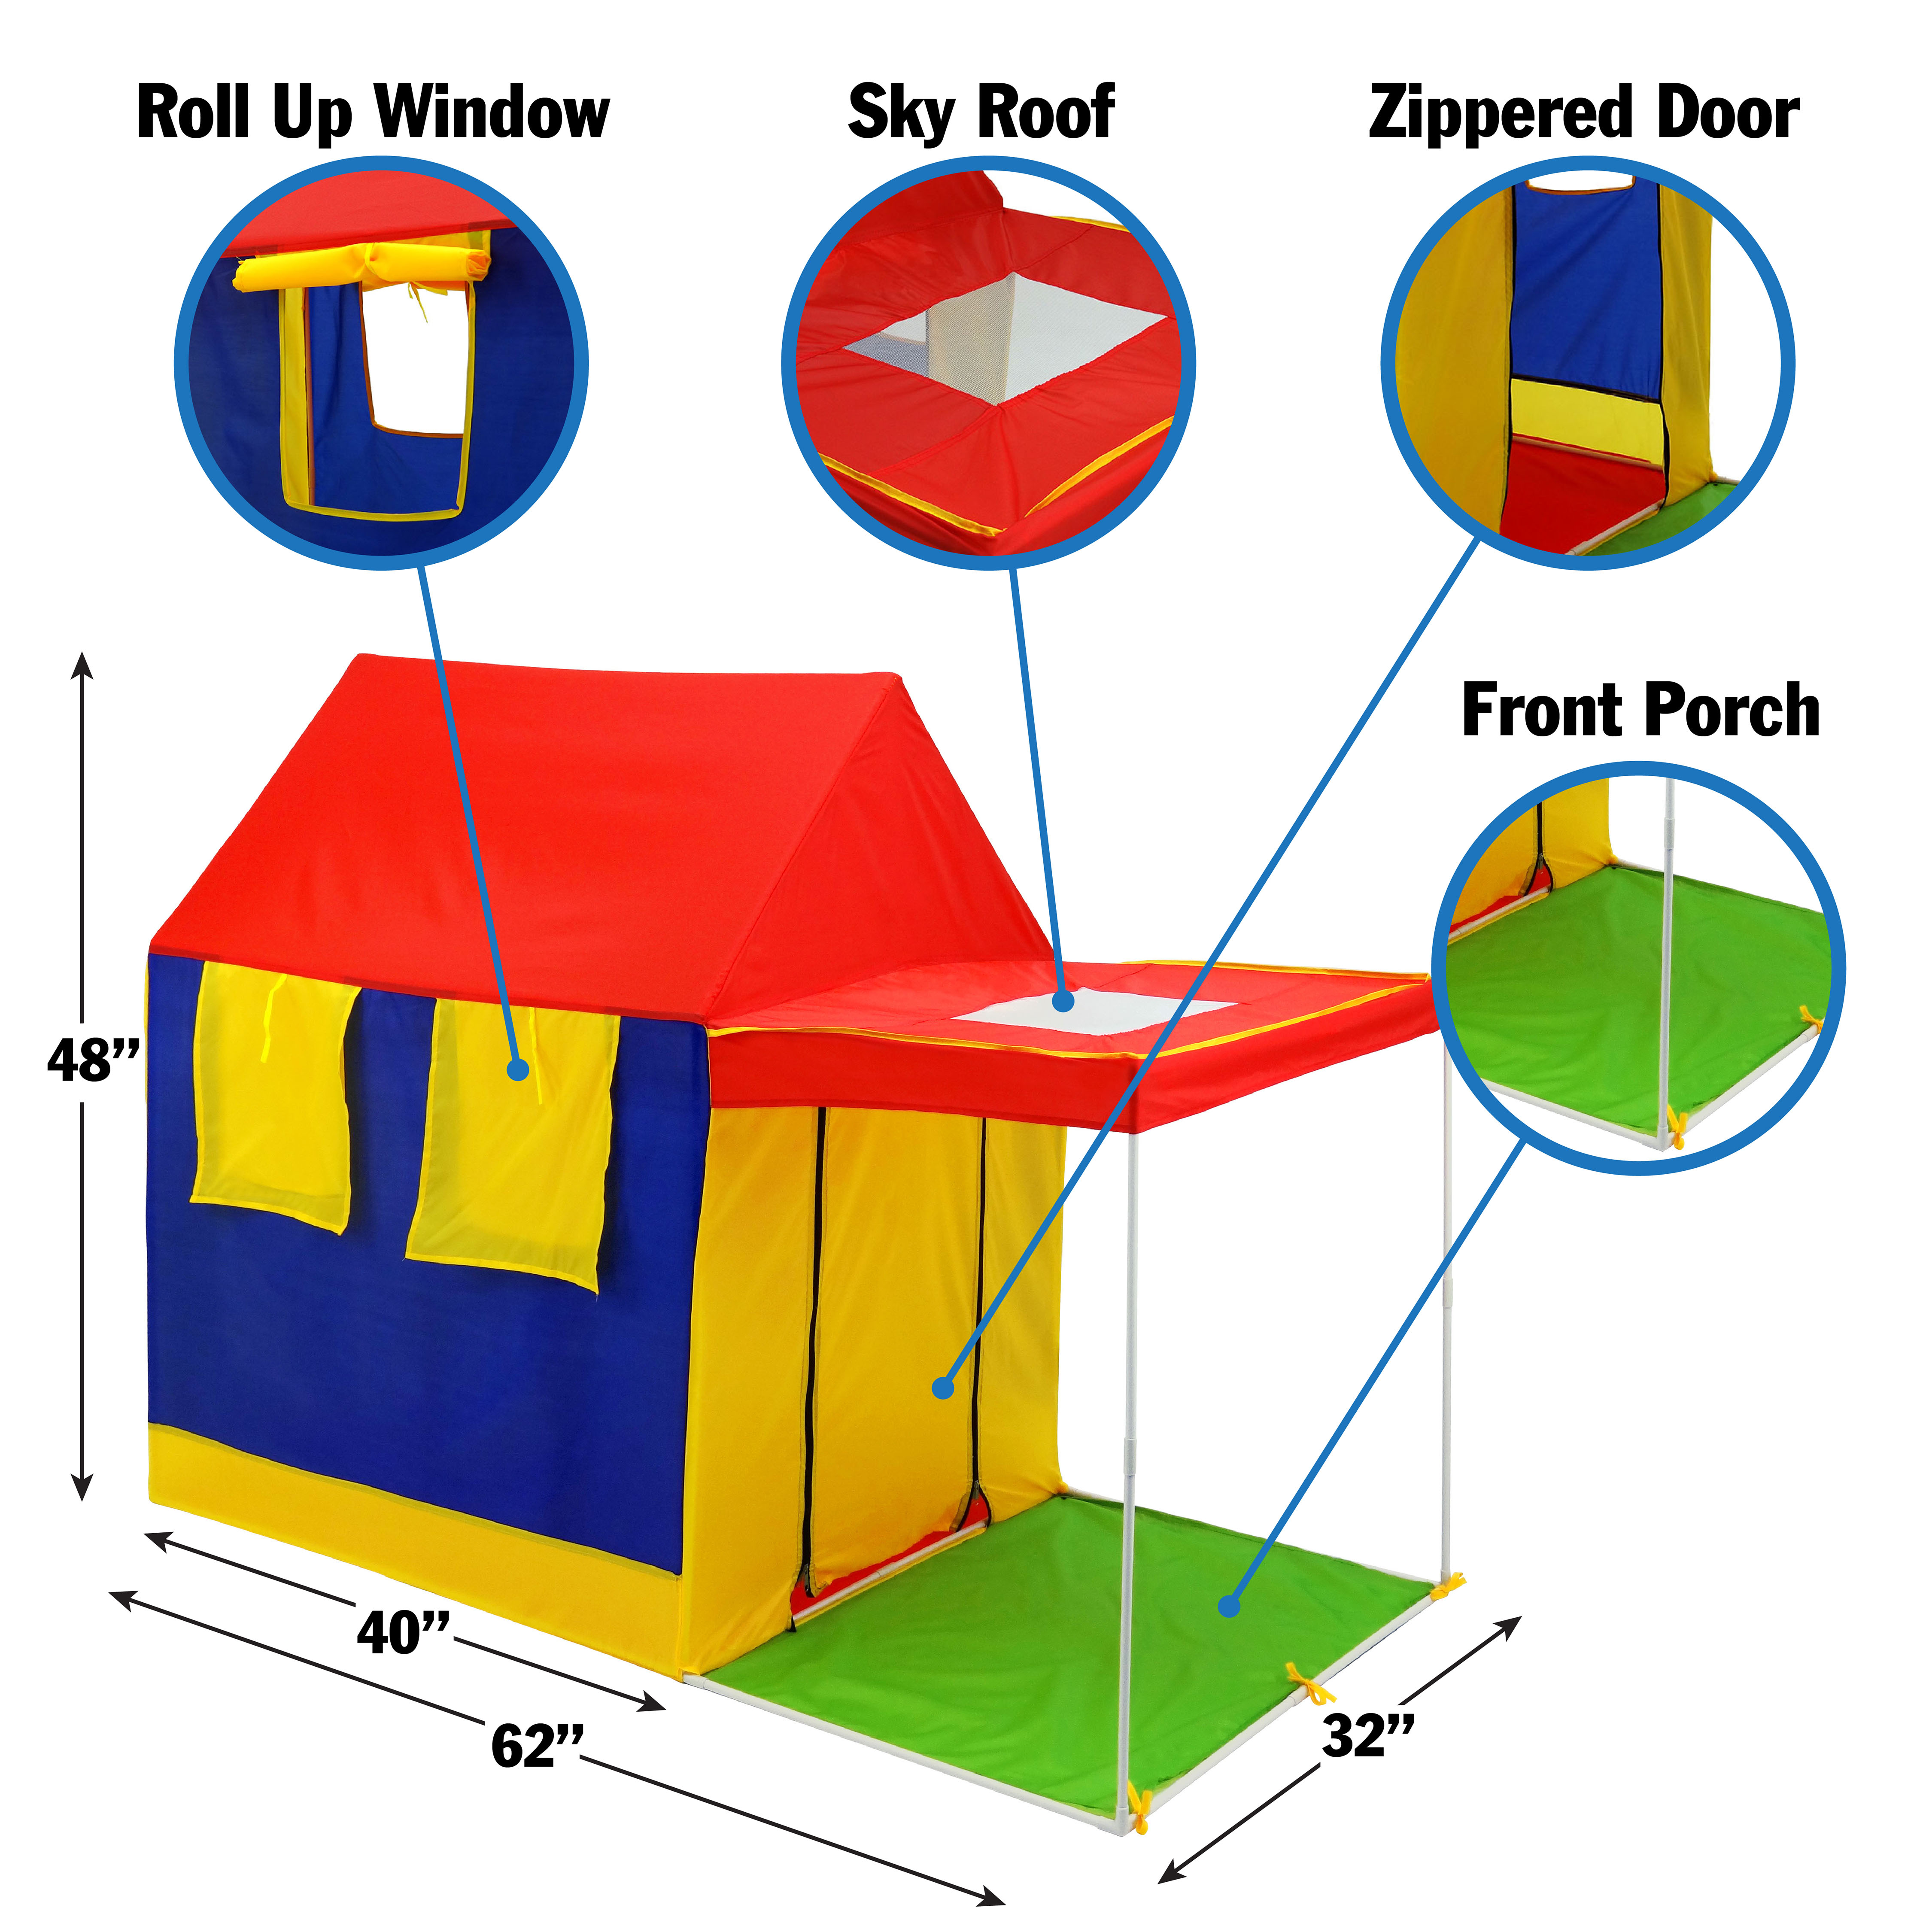 GigaTent Summer House 4 Large Windows With Skylight & Porch Shade Polyester Play Tent, Multi-color - image 2 of 2